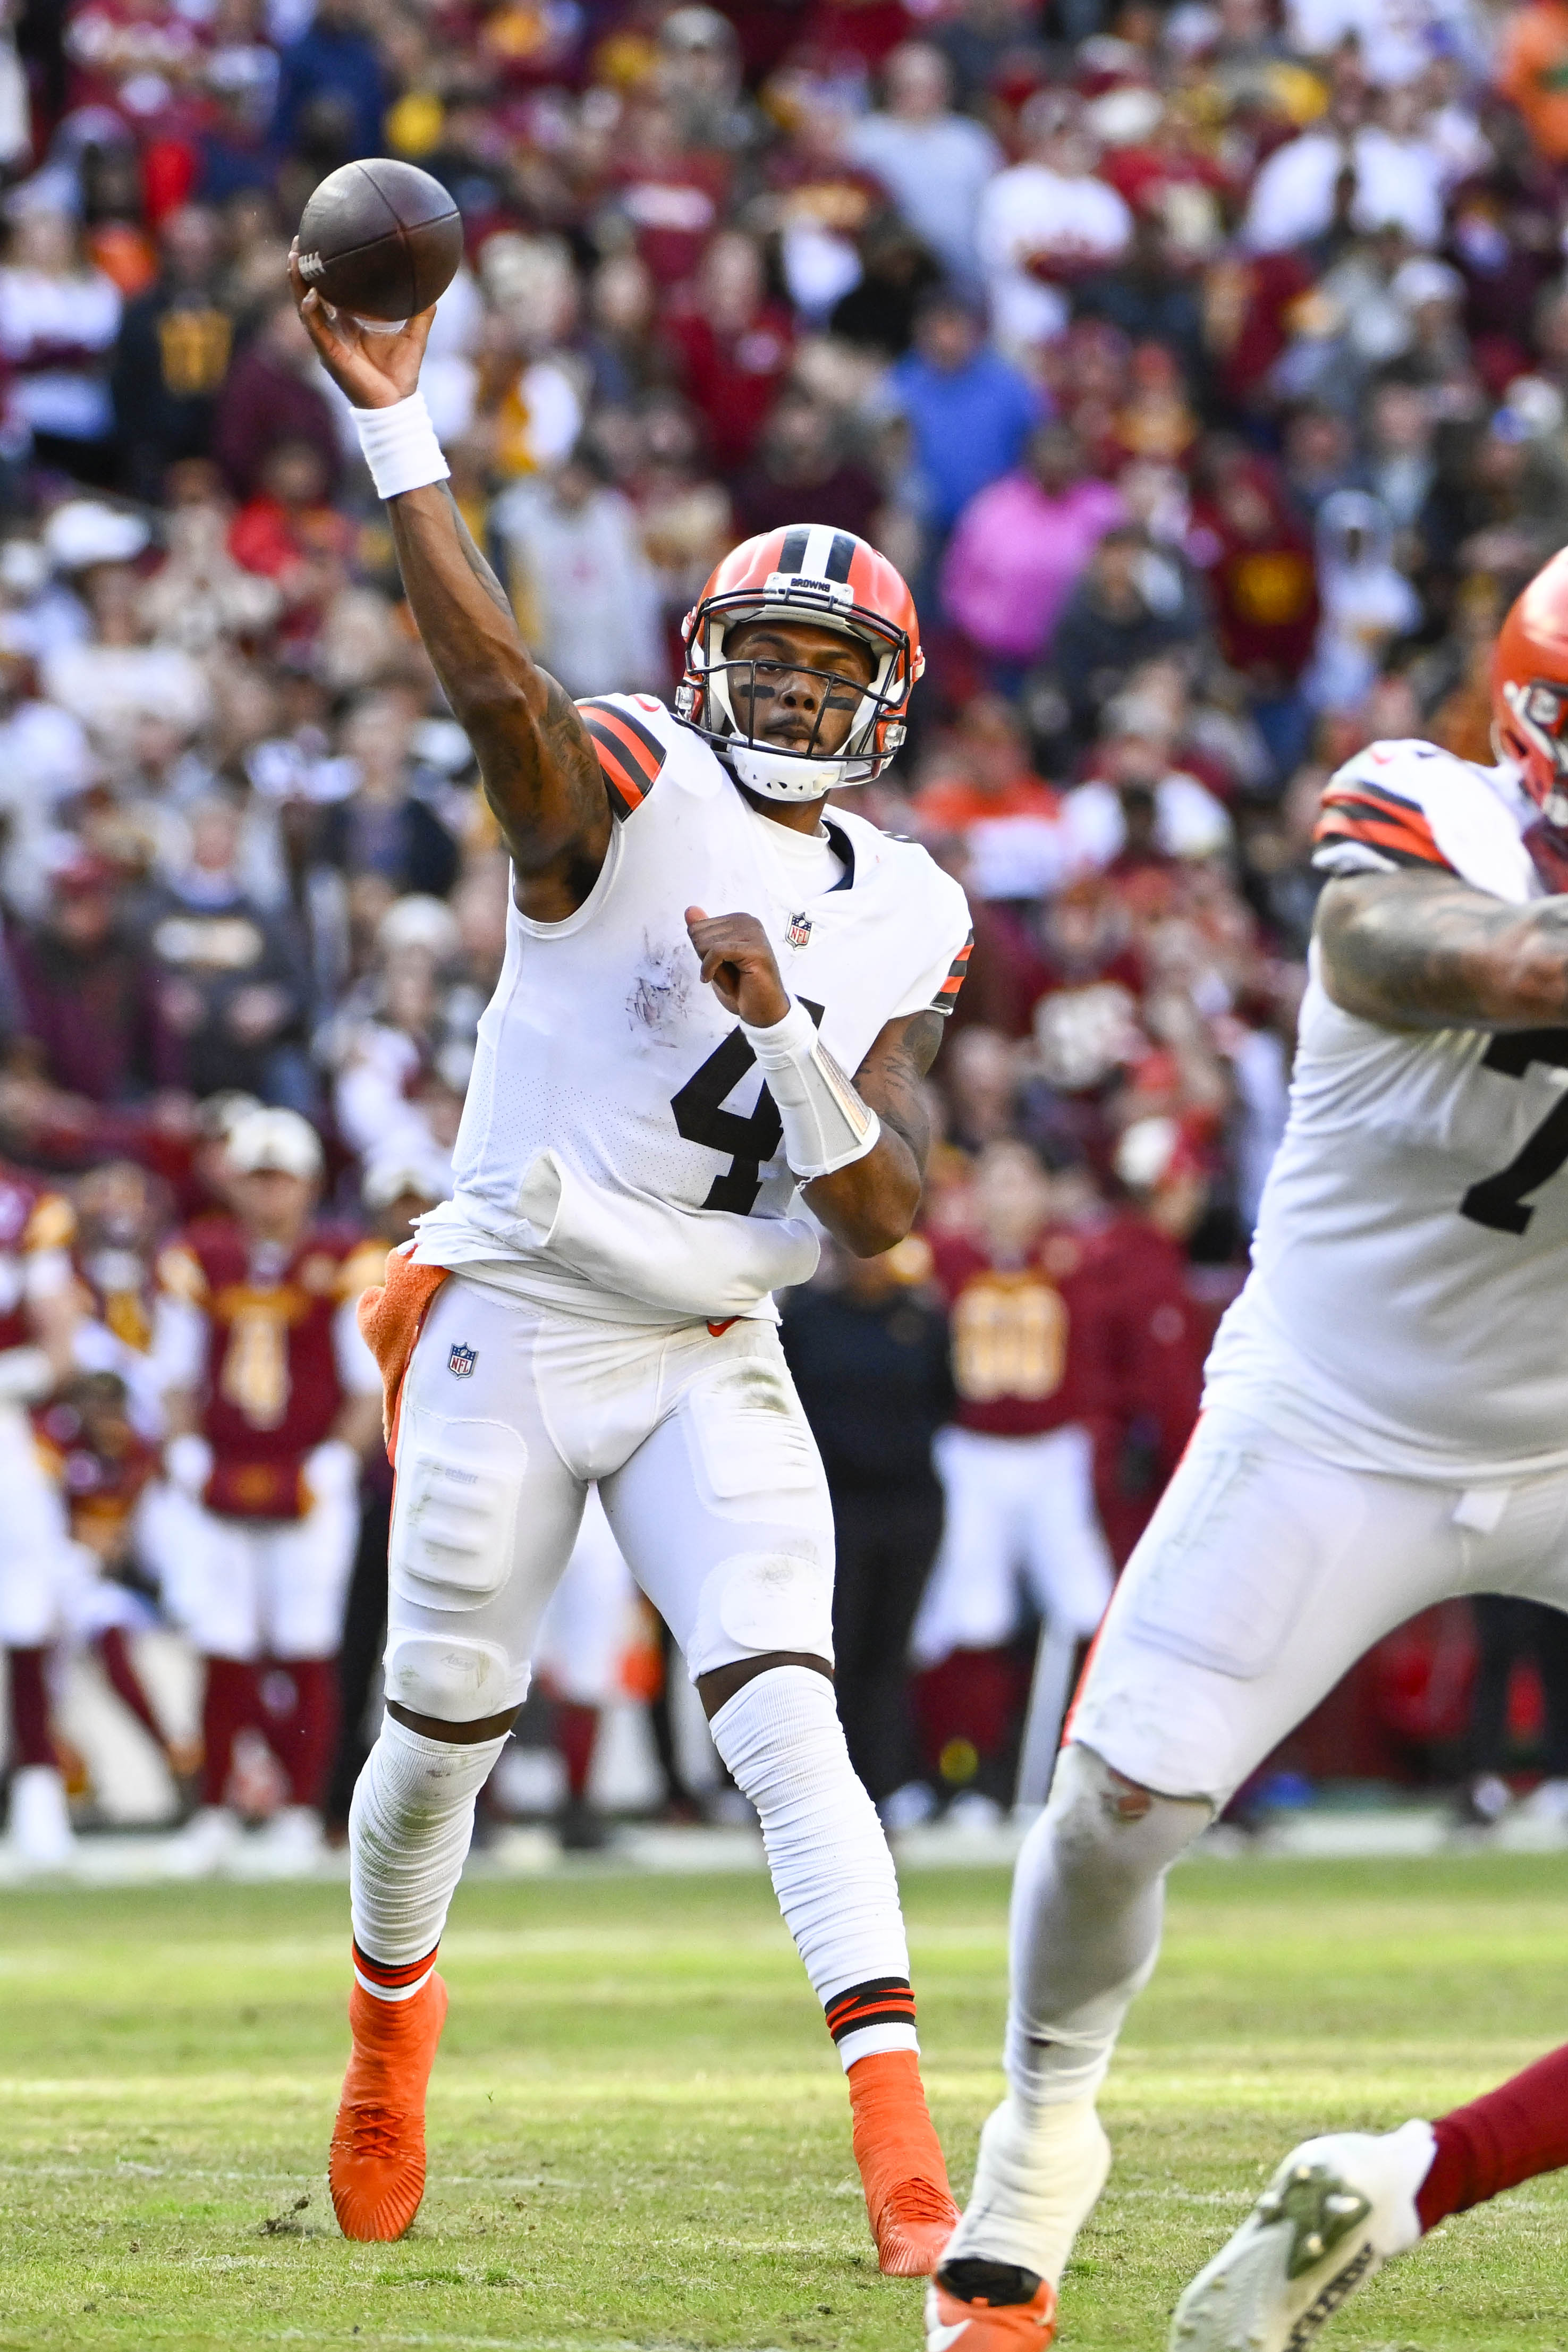 NFL: Cleveland Browns at Washington Commanders